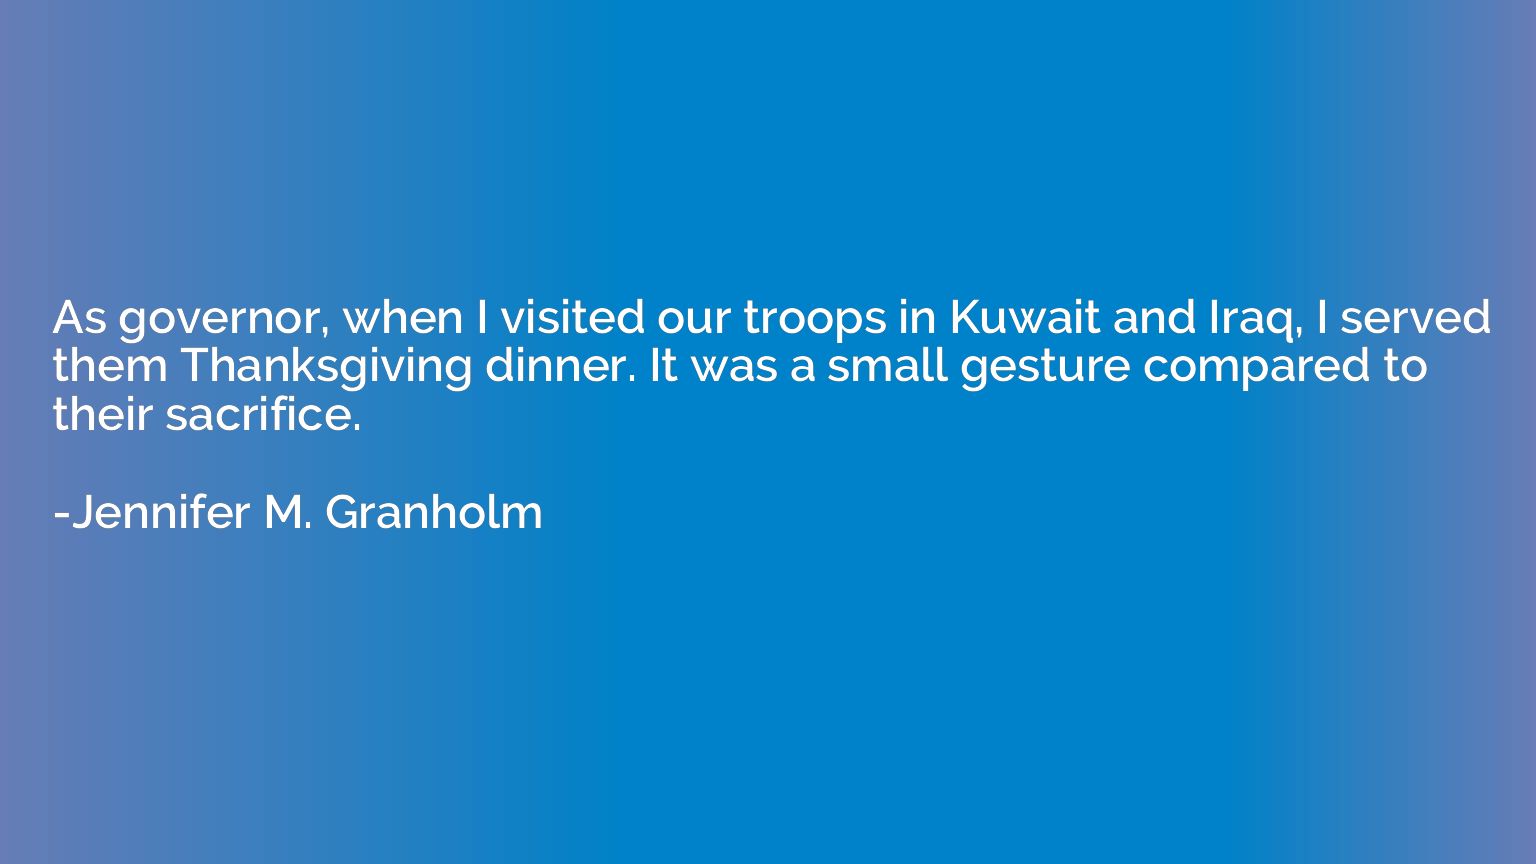 As governor, when I visited our troops in Kuwait and Iraq, I